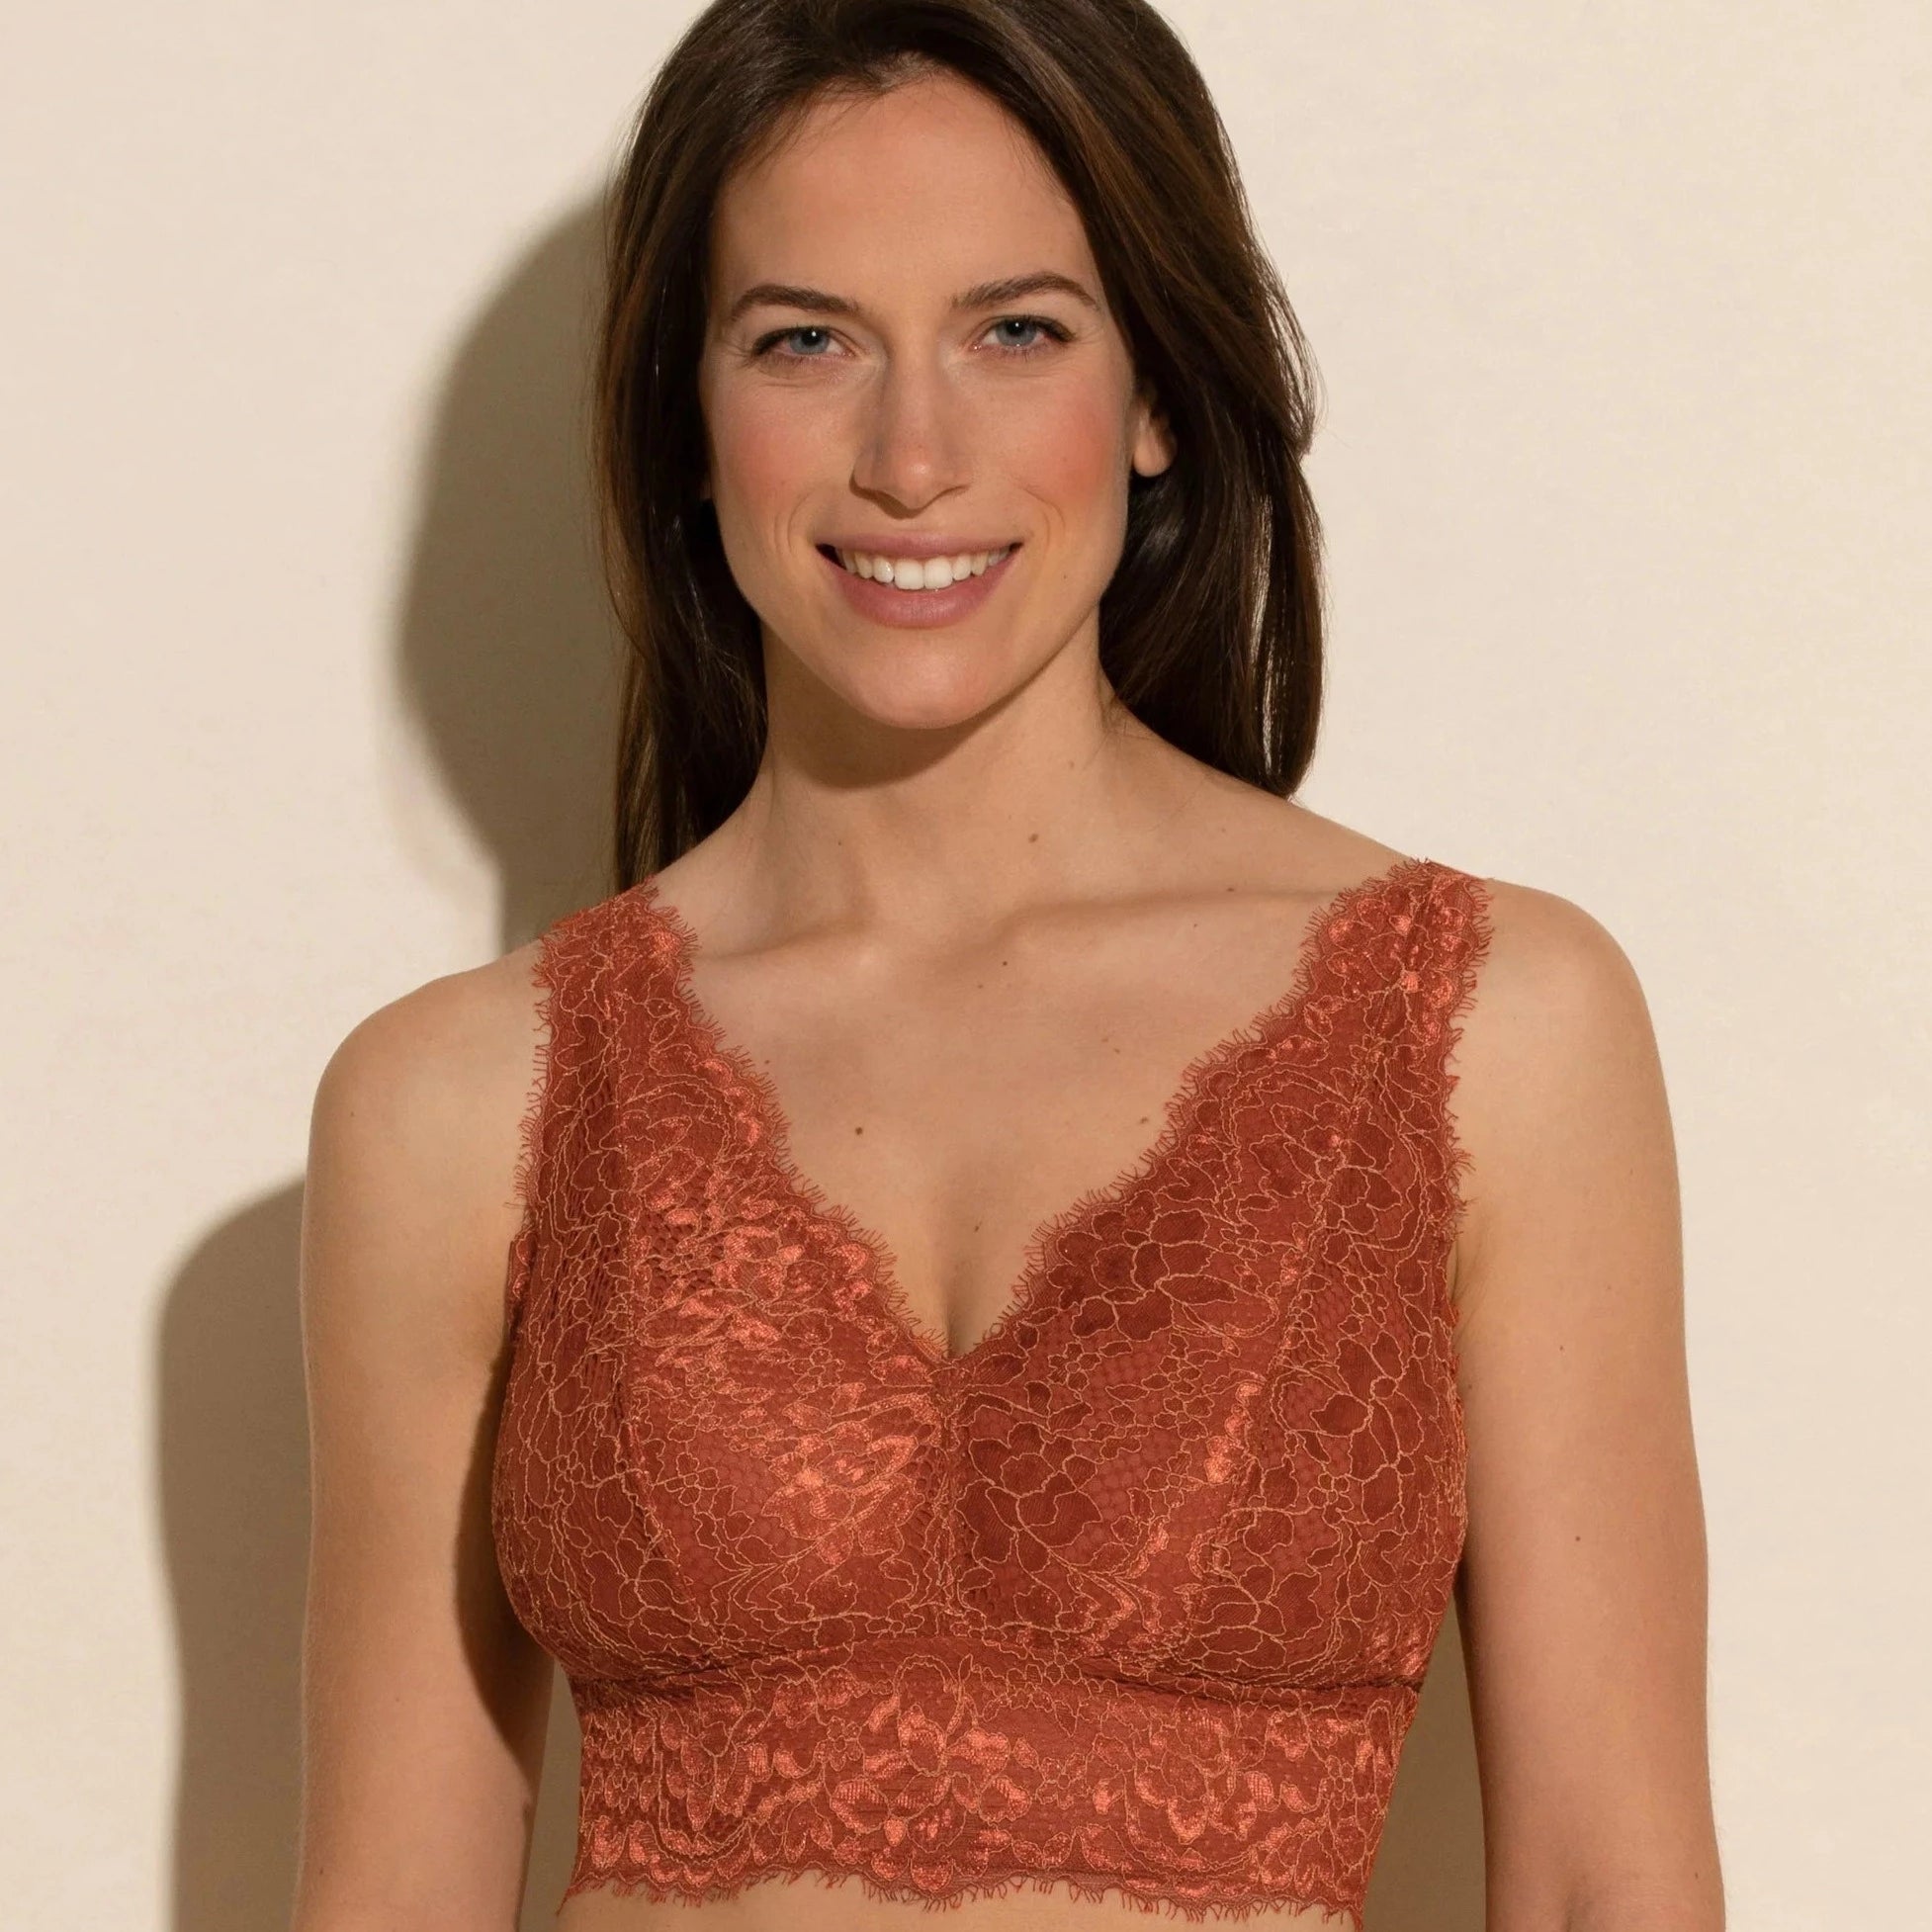 Pret-a-Porter multi-dimensional floral lace stuns in multiple color combinations. The Pret-a-Porter Curvy Longline Bralette is date night worthy, specially designed and sized for those with full busts with smaller bands.